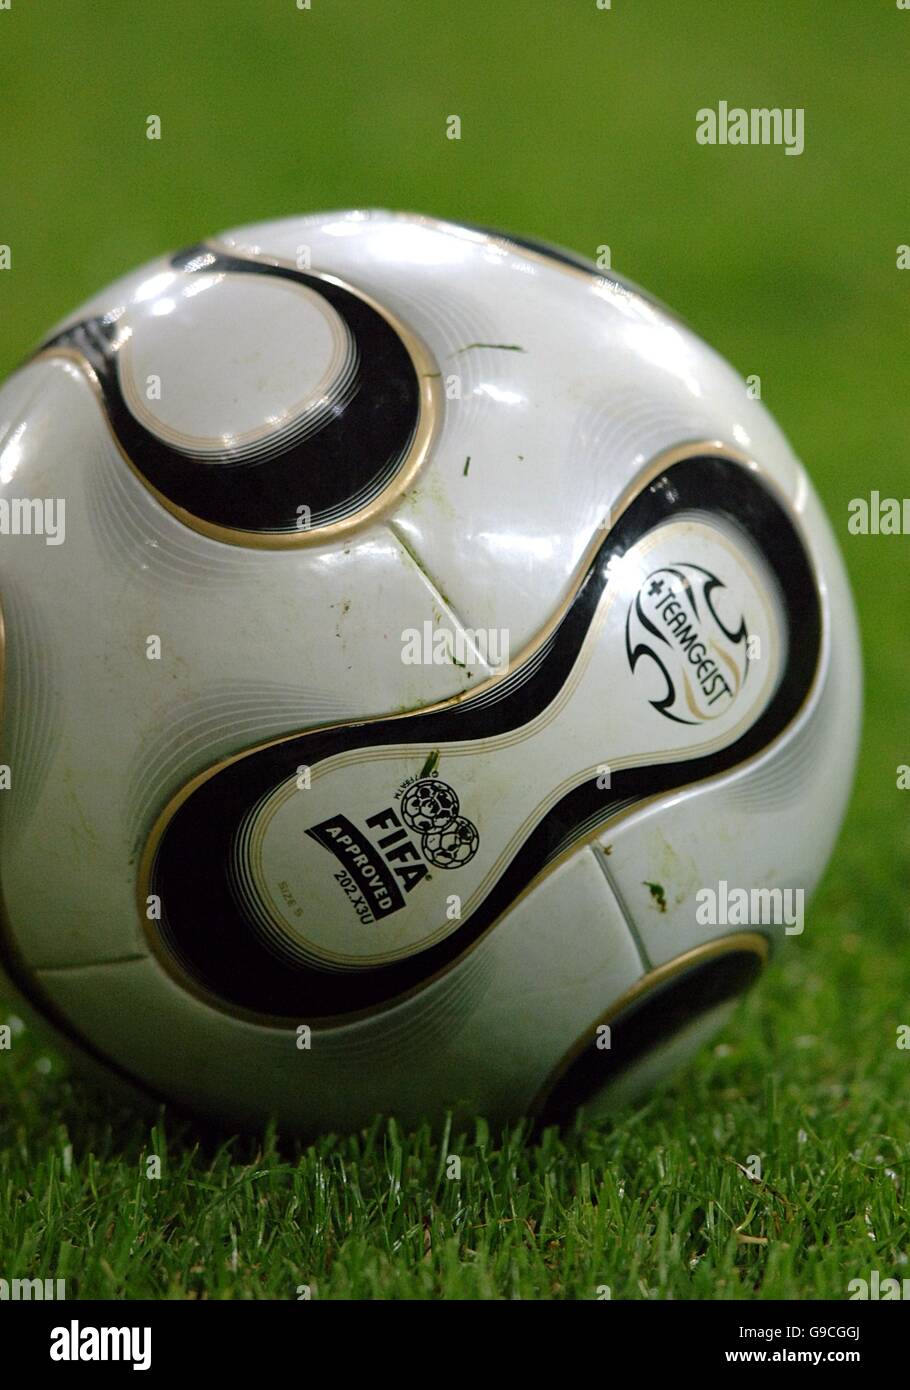 Soccer - 2006 FIFA World Cup Germany - Group D - Portugal v Mexico - AufSchalke Arena. Match ball Stock Photo